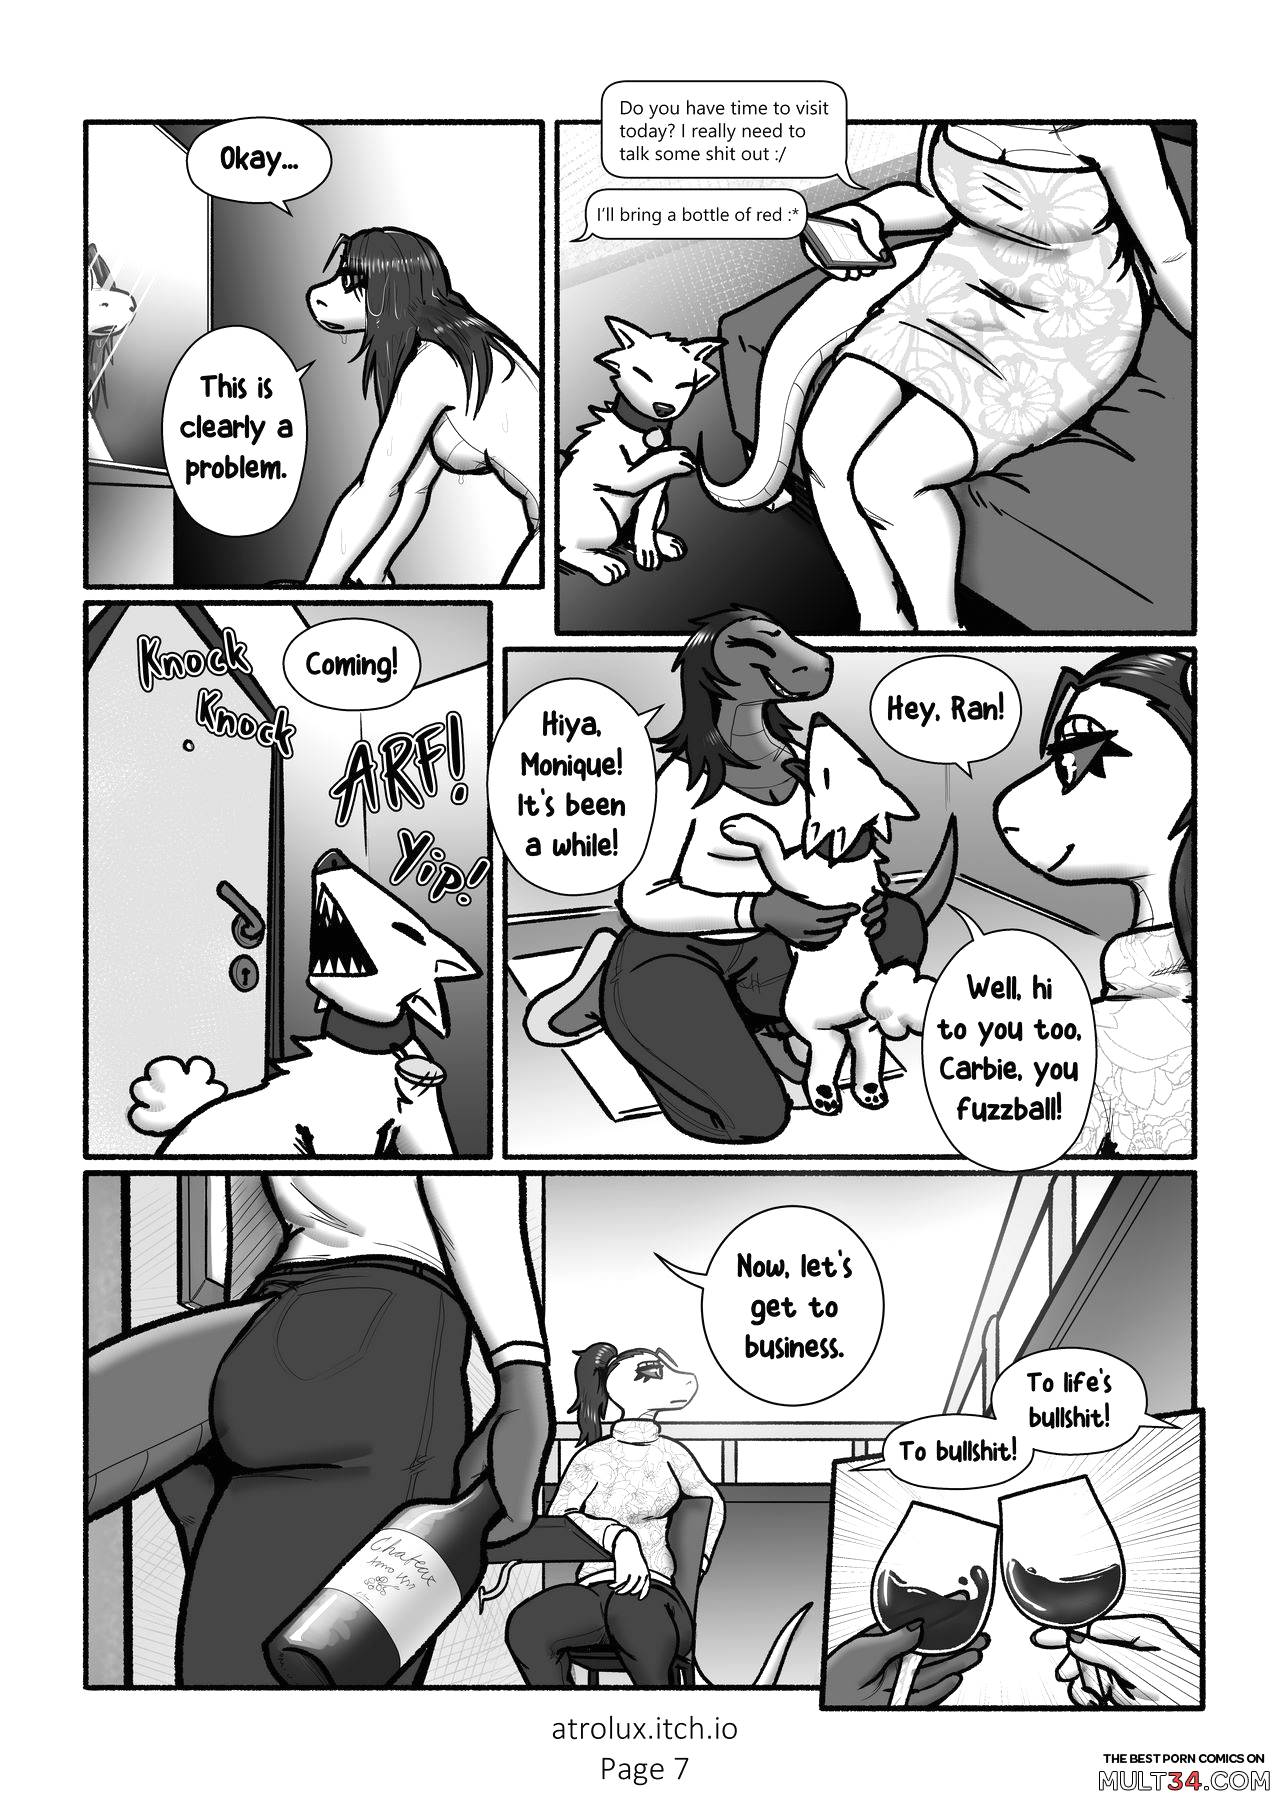 Shedding Inhibitions 6 - Feigned Innocence page 10